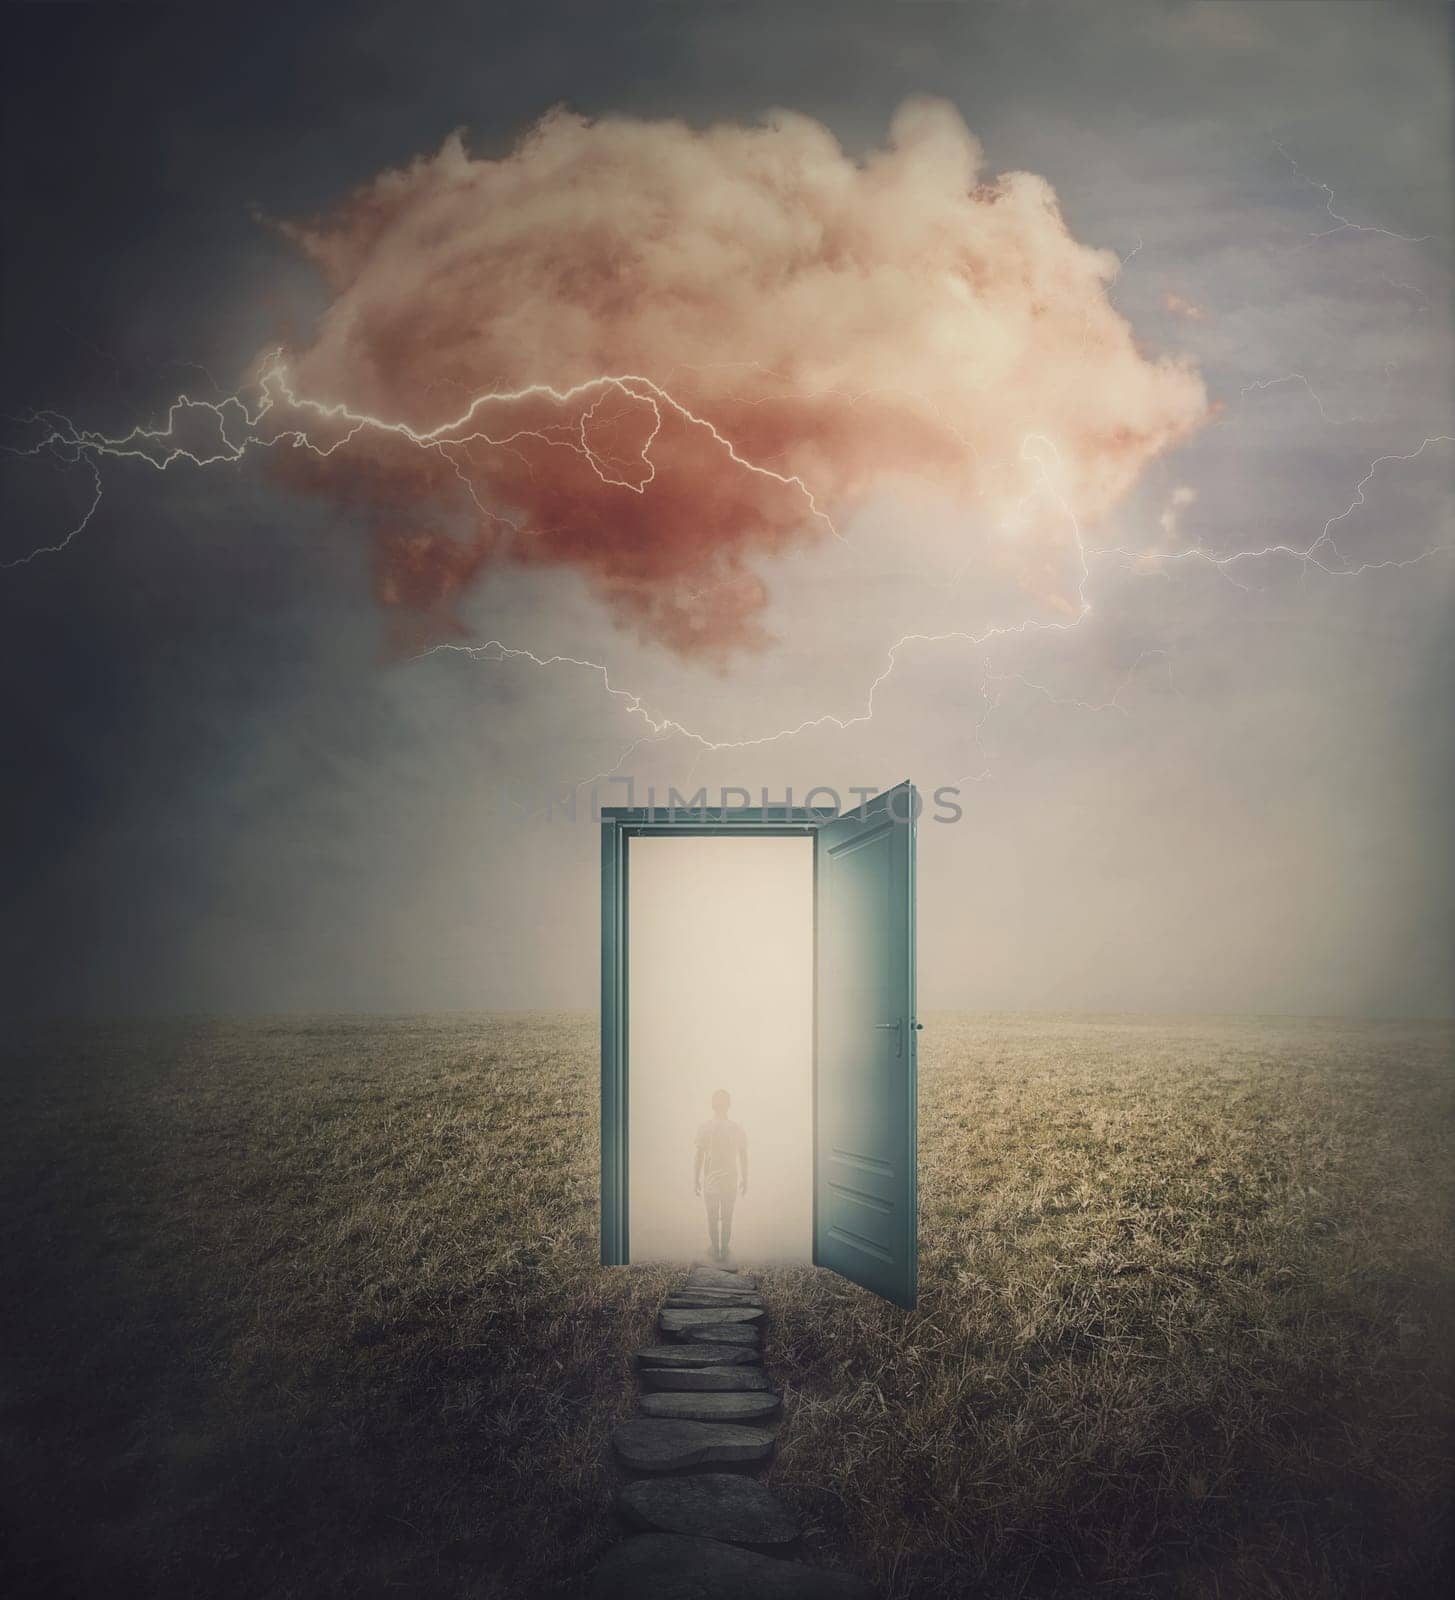 Surreal scene, teleportation concept, time and space traveling through a open door on a mystic land. Magic cloud in the sky, mysterious lightnings and a wanderer person silhouette in the mist. by psychoshadow